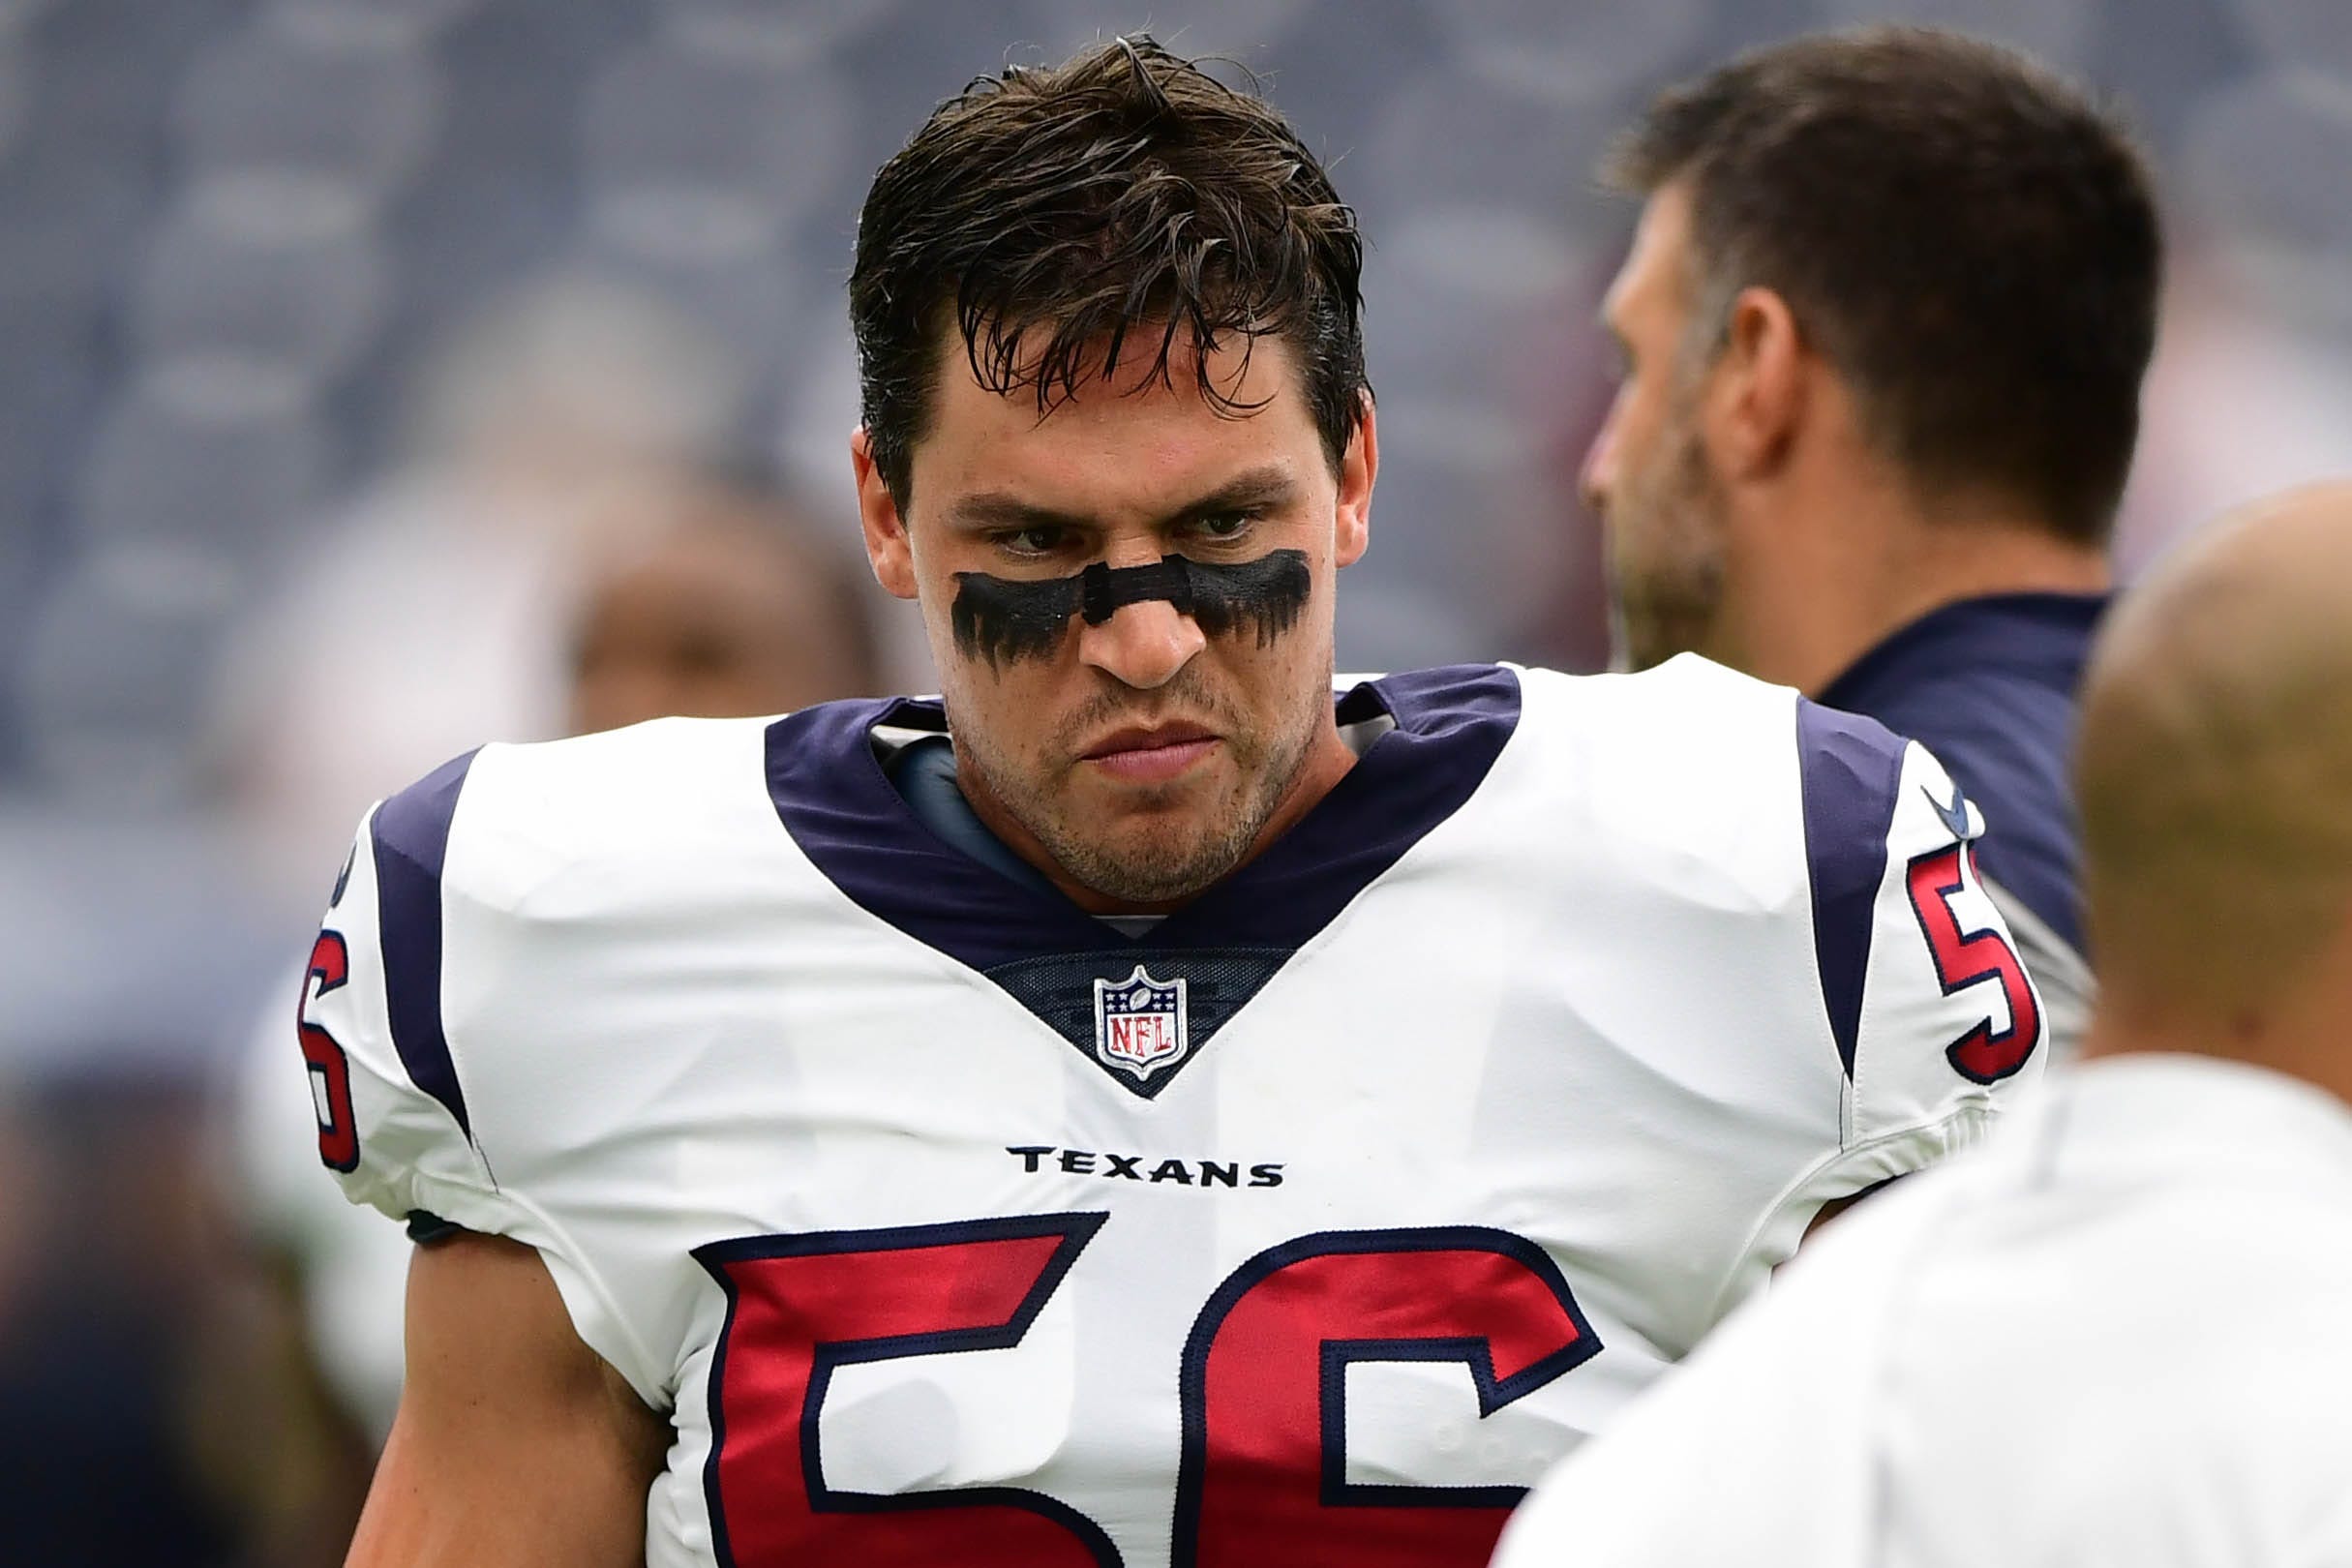 Brian Cushing, twice suspended for PEDs, hired to Texans' strength and conditioning staff